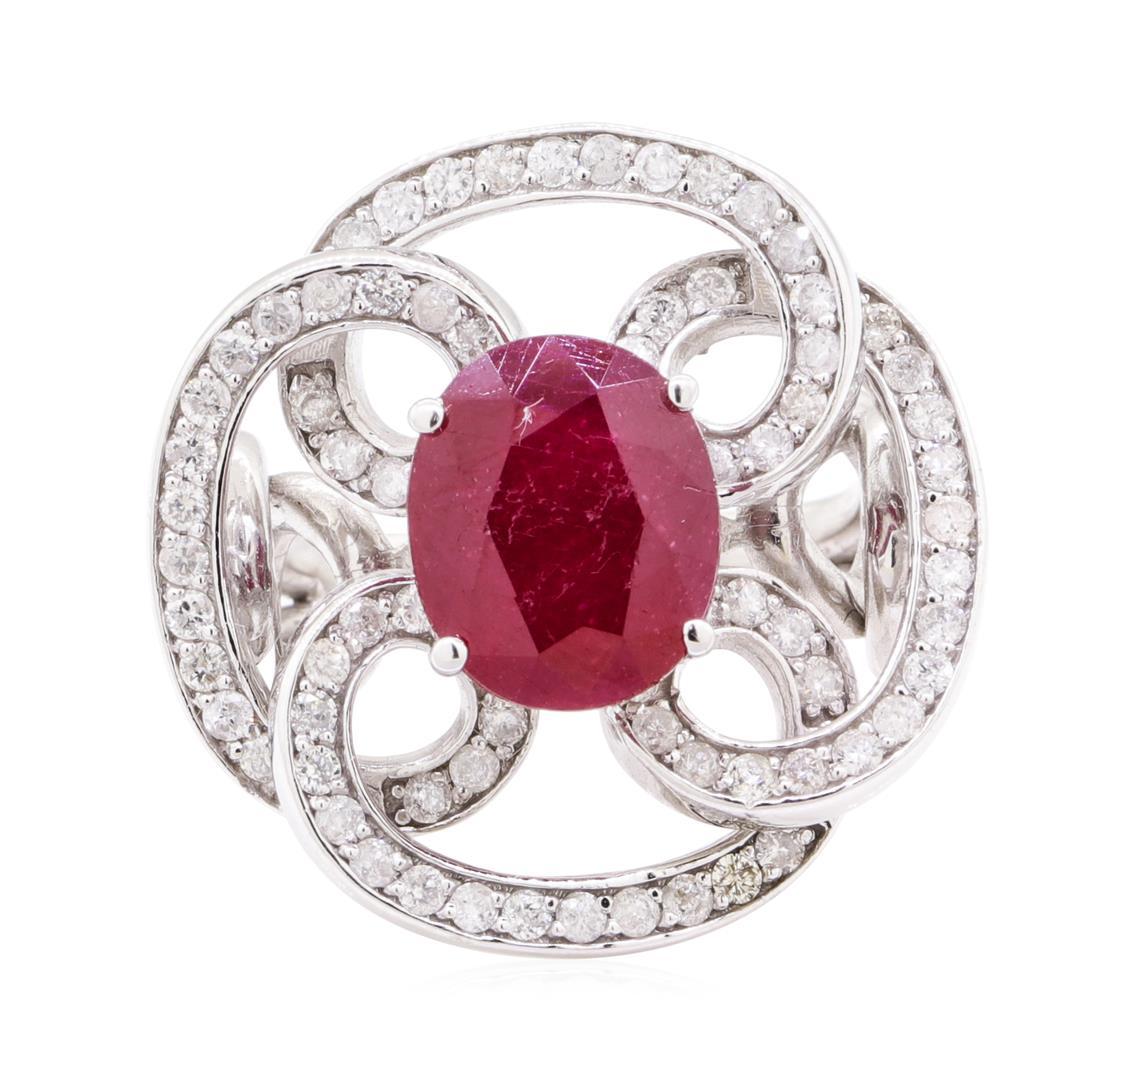 5.78 ctw Ruby And Diamond Ring - 14KT White Gold